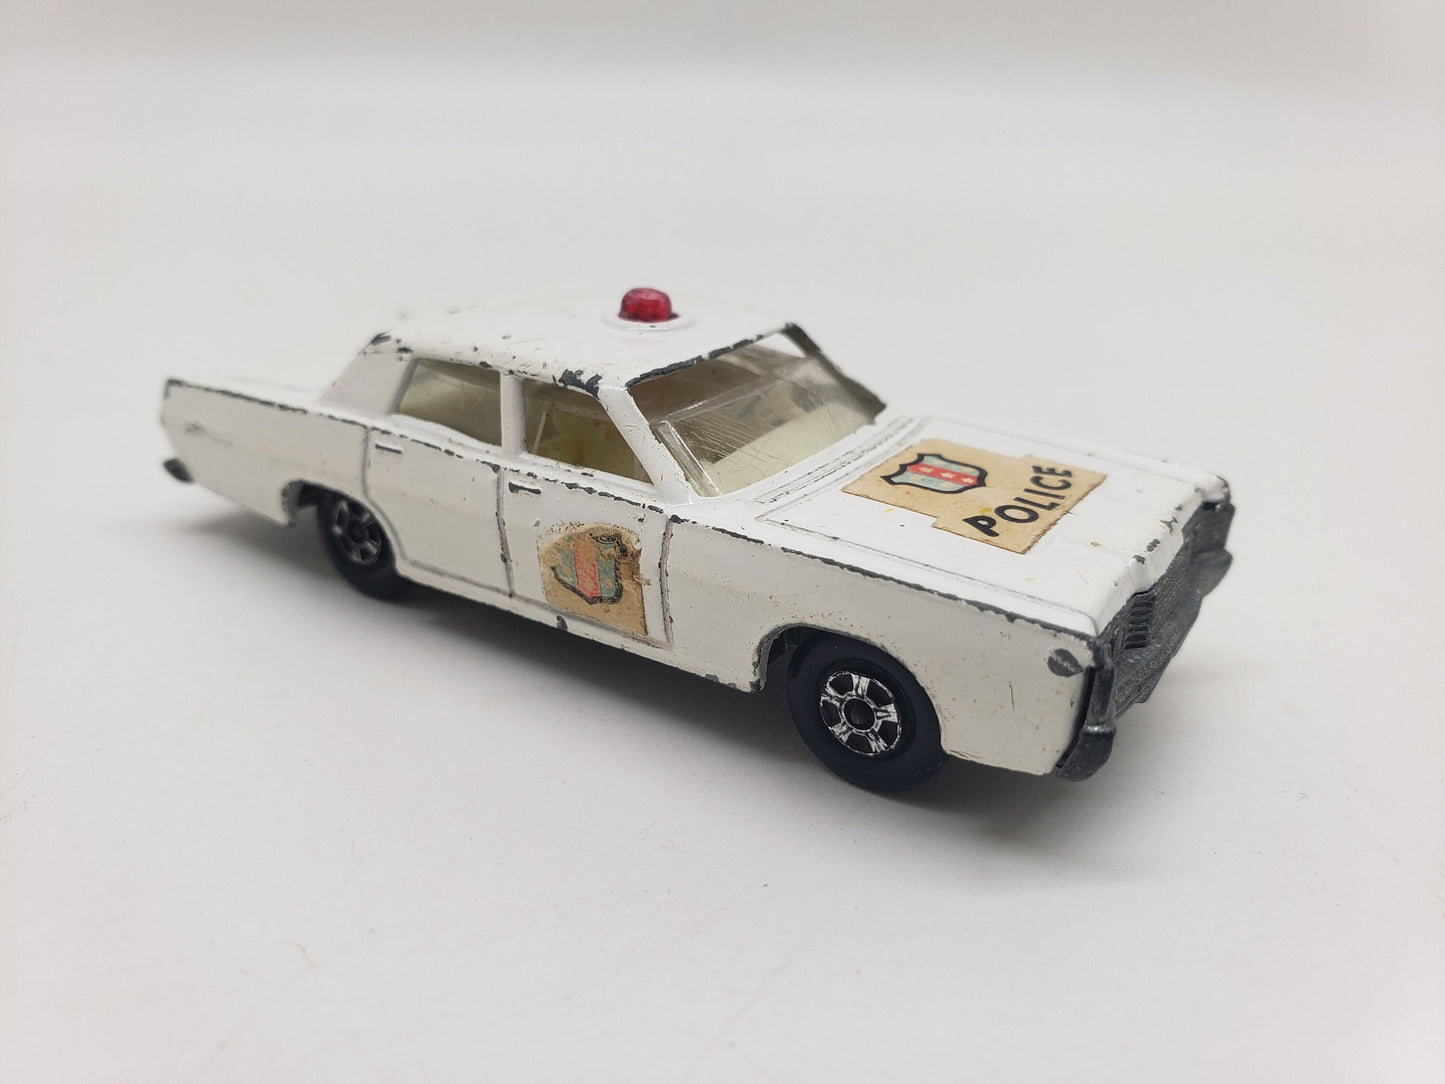 Matchbox 1970 Mercury Park Lane Police Car White Collectable Scale Model Miniature Toy Car Perfect Birthday Gift